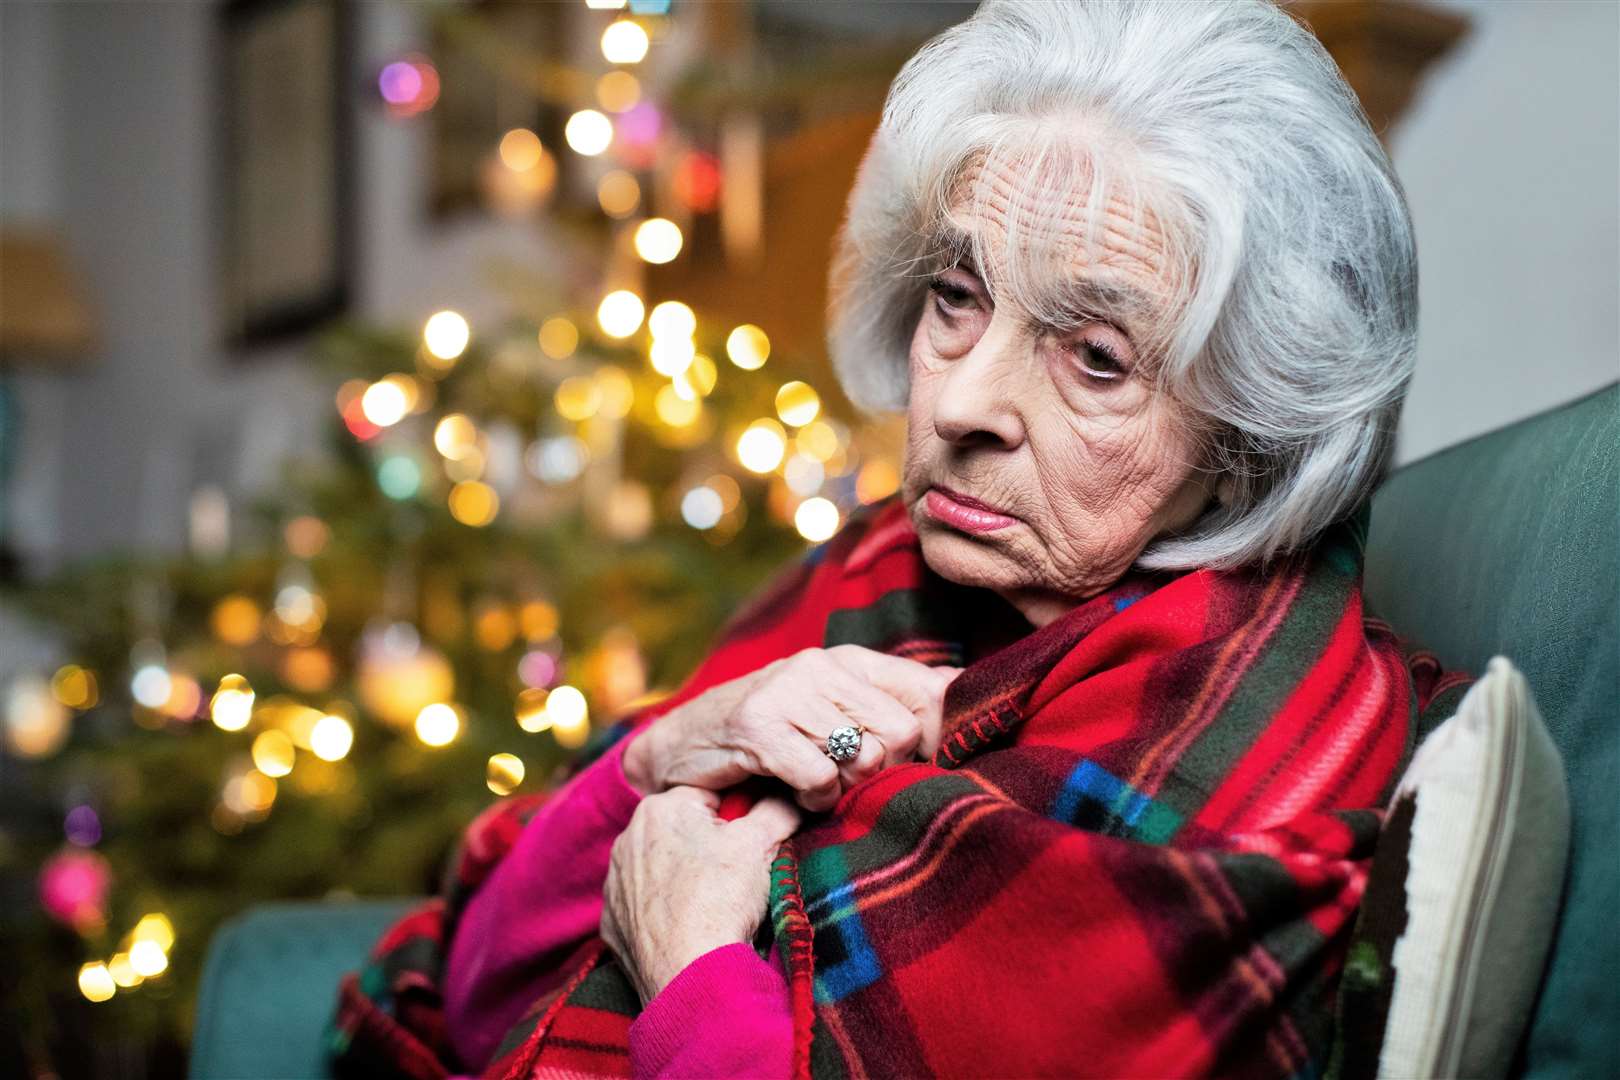 Many elderly people can feel isolated and lonely at this time of year.